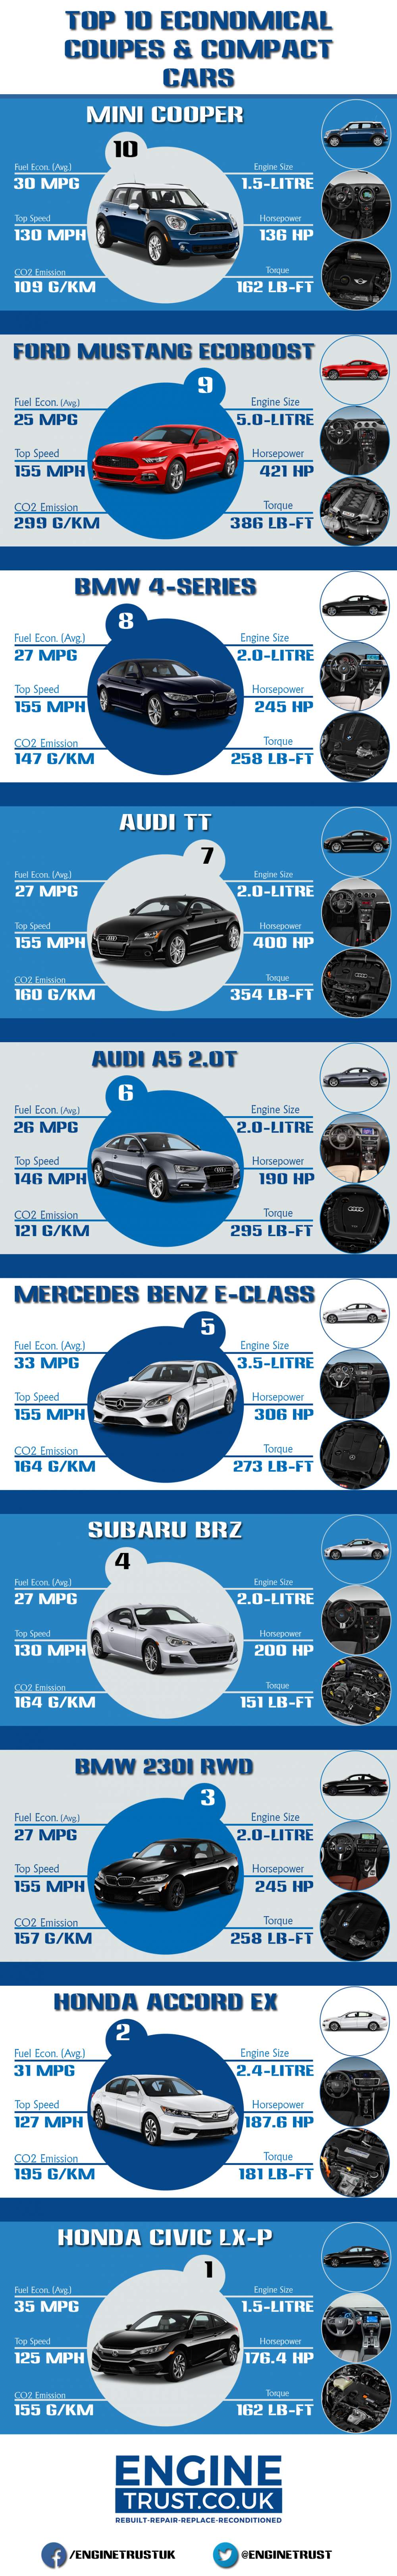 Top-10-Economical-Coupes-Compact-Cars